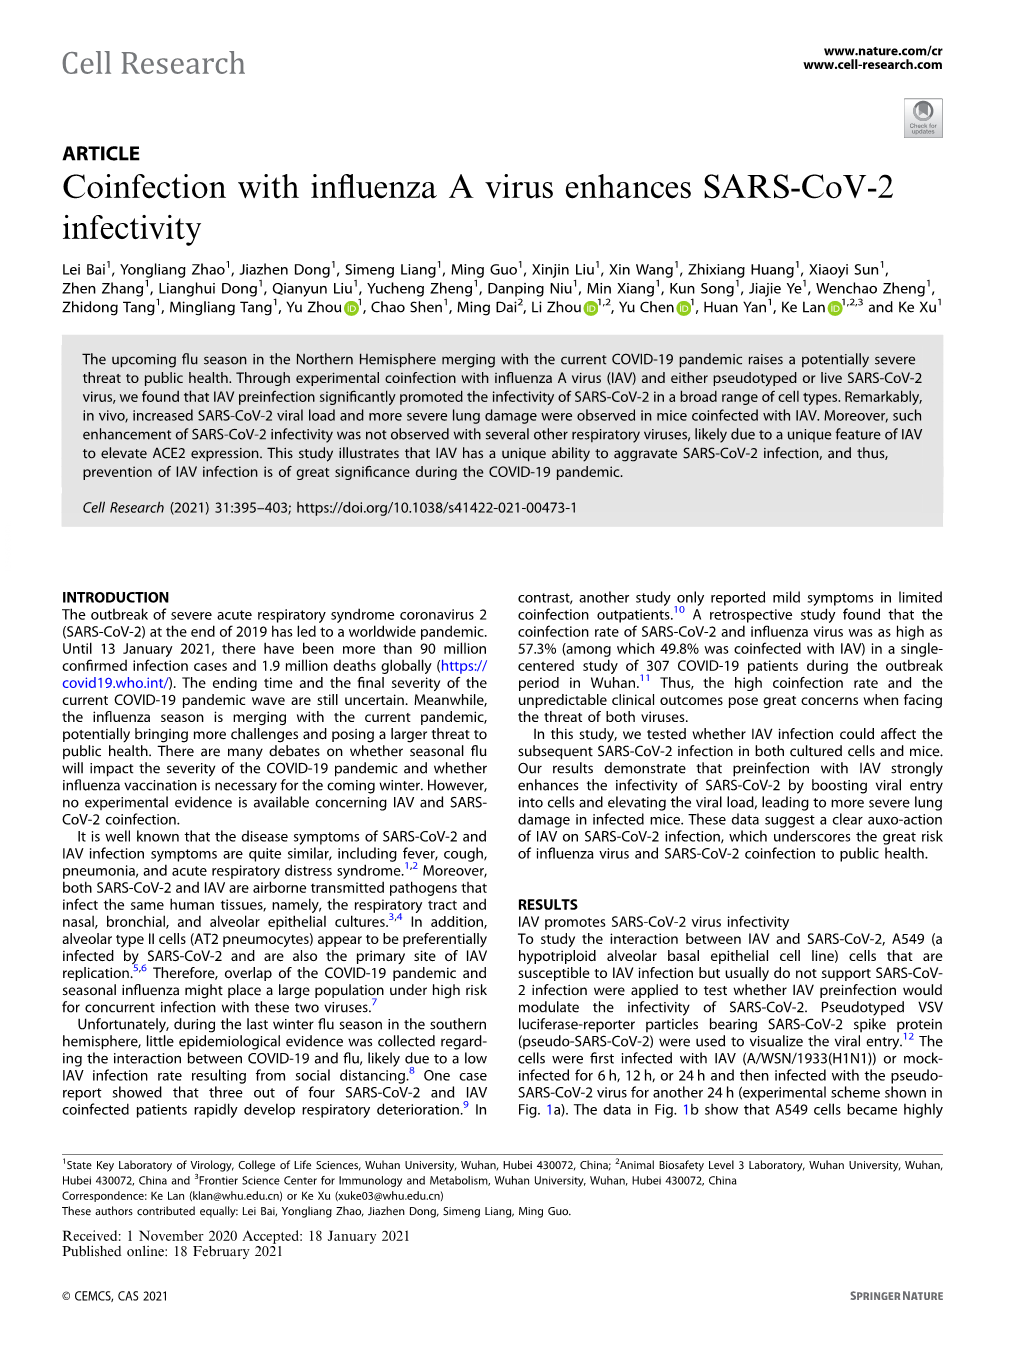 Coinfection with Influenza a Virus Enhances SARS-Cov-2 Infectivity